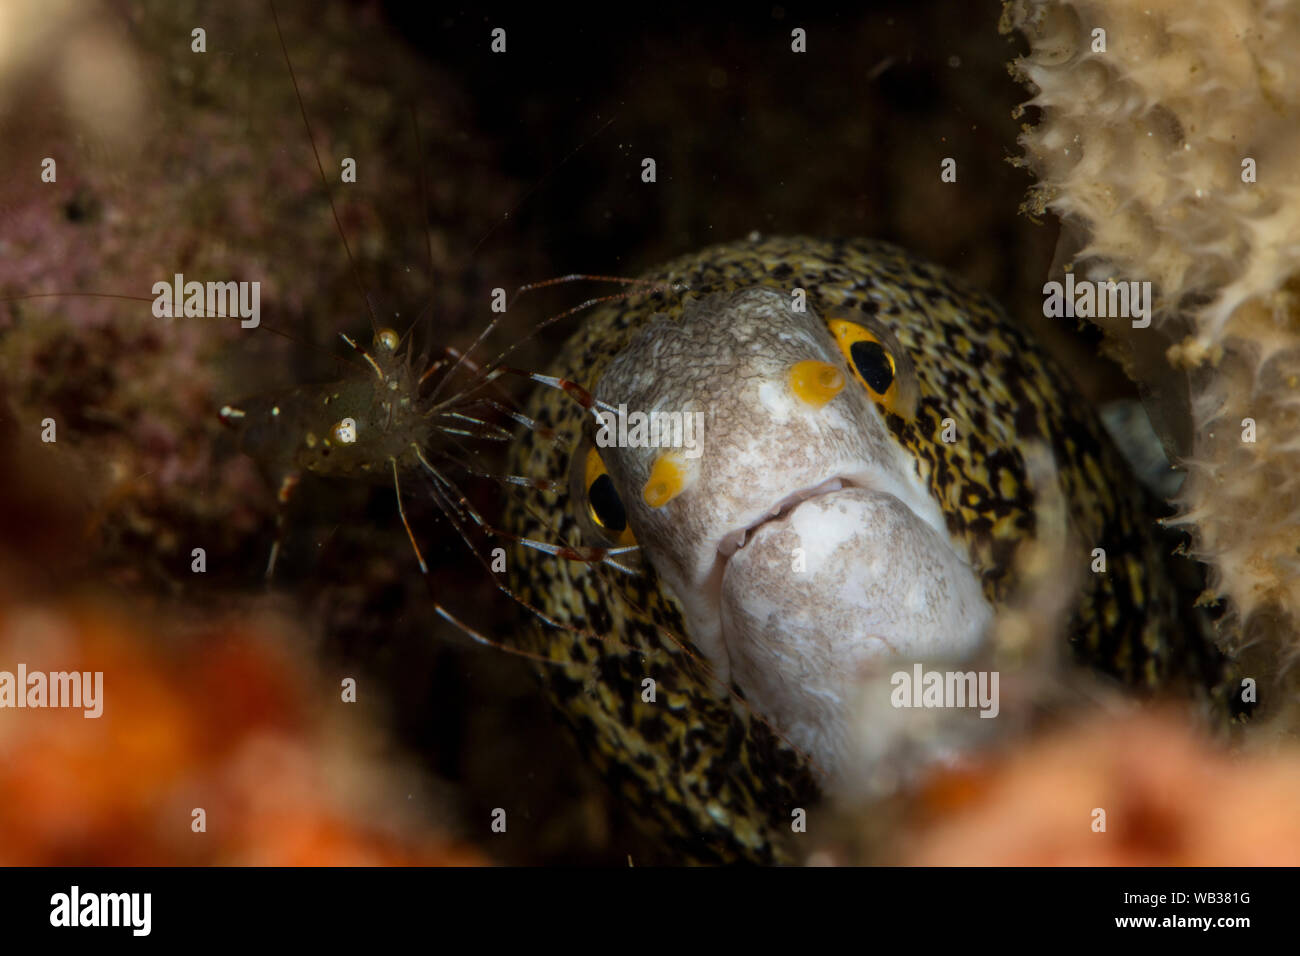 Snowflake Moray Eel, Being Manicured by a Cleaner Shrimp, Anilao Philppines. Stock Photo